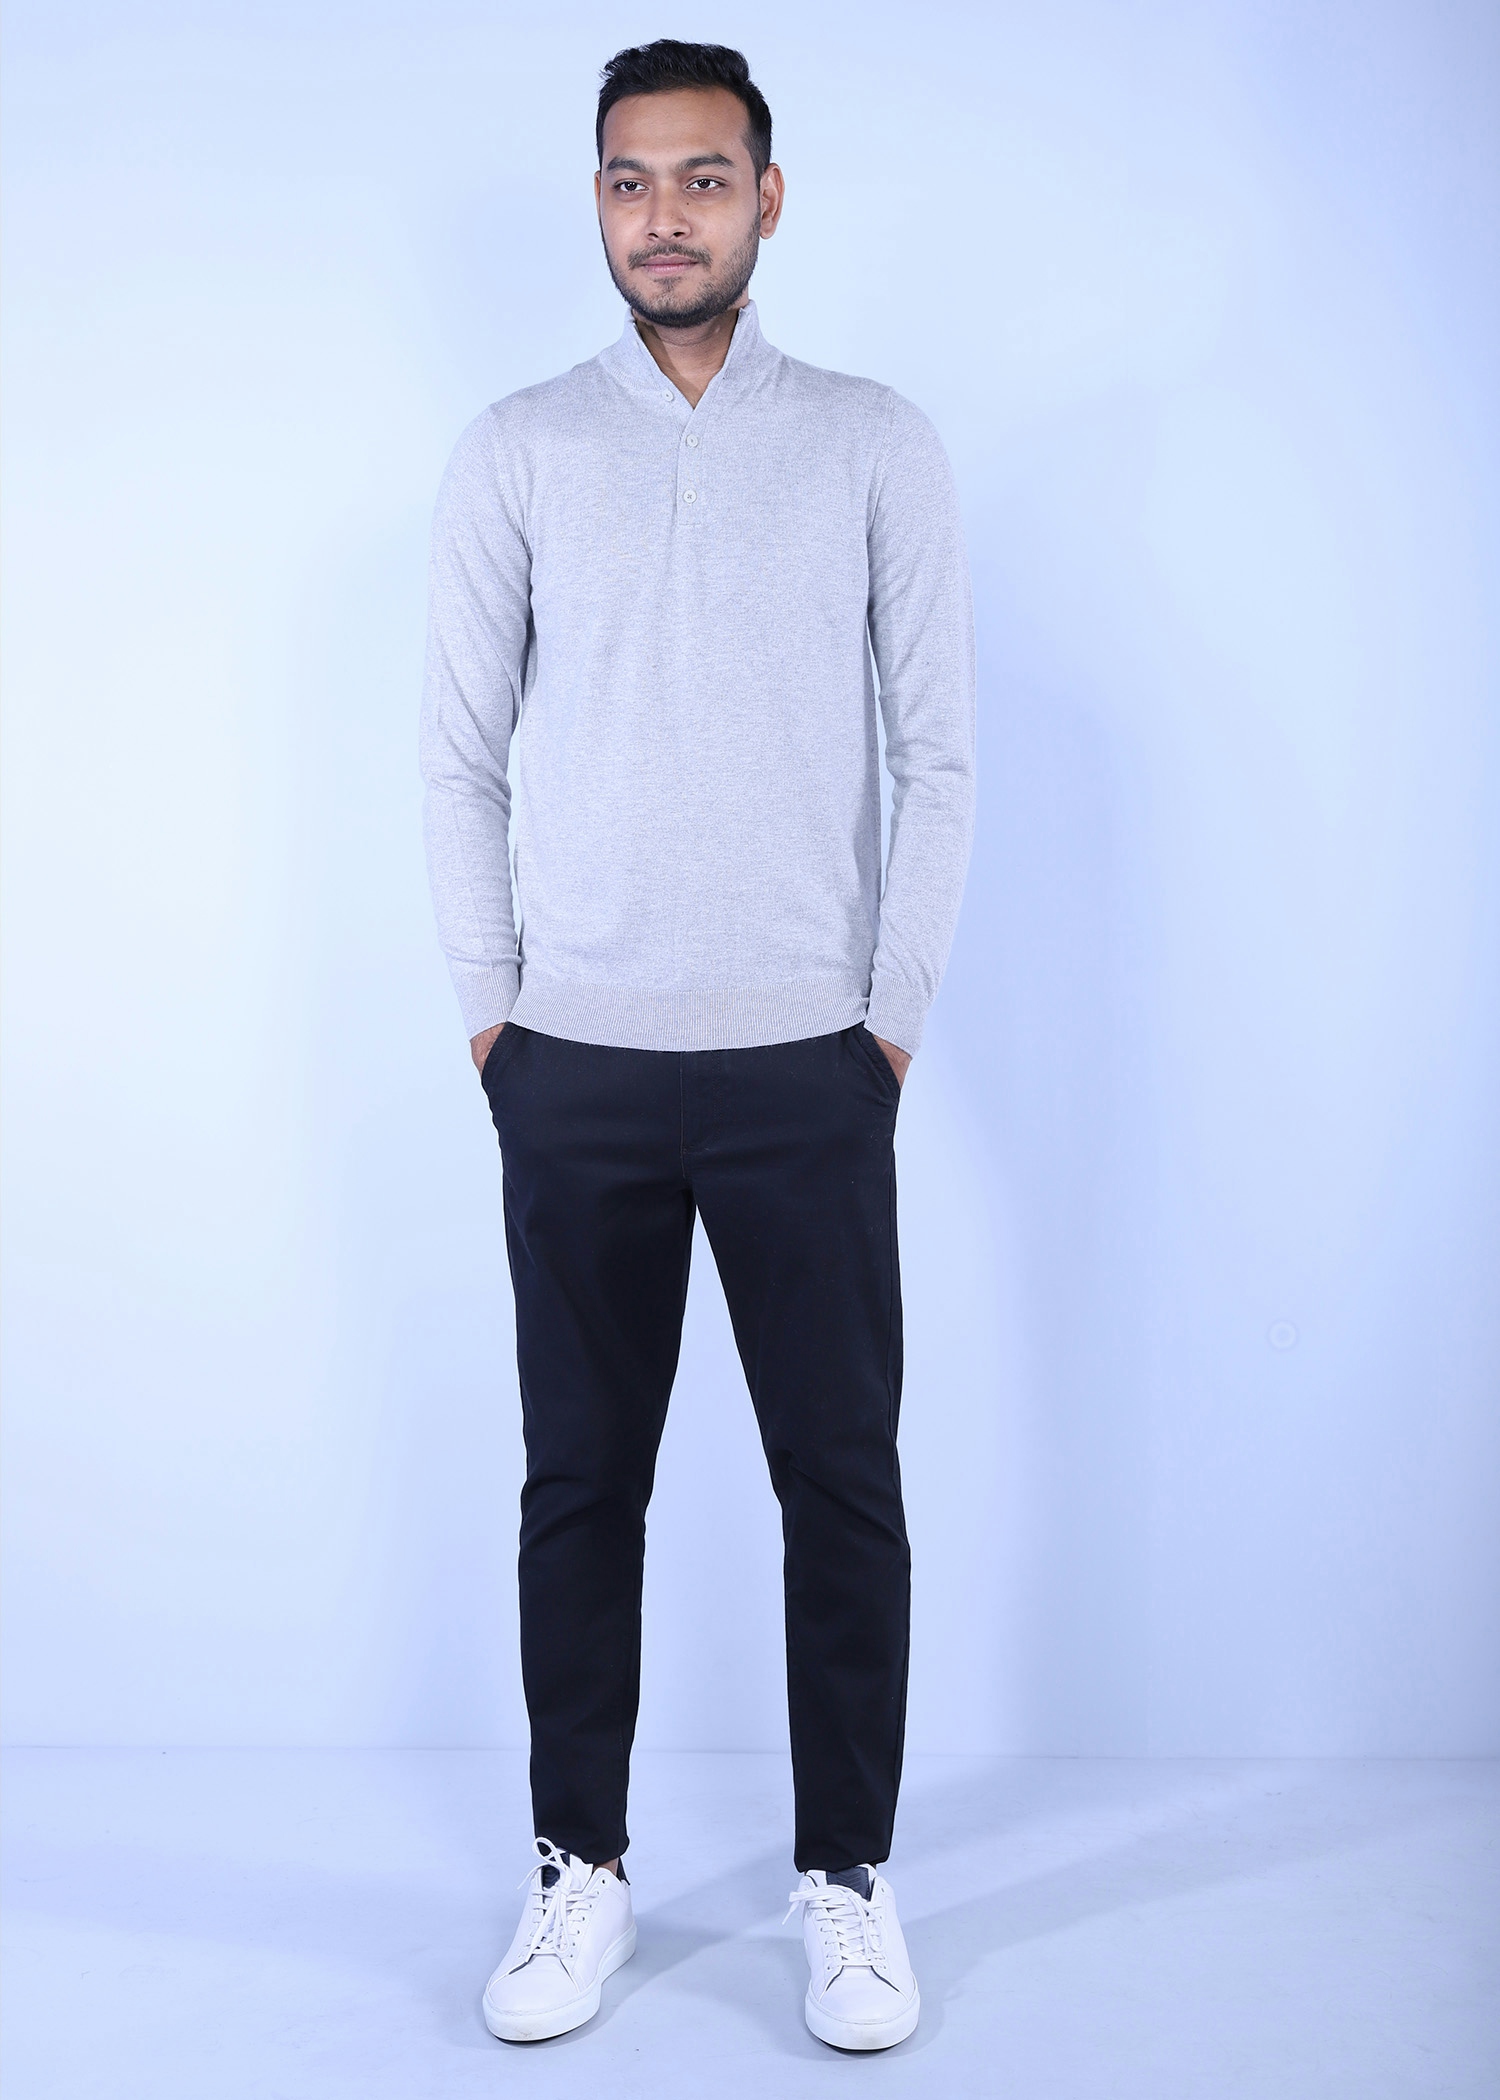 hornero i sweater grey color full front view